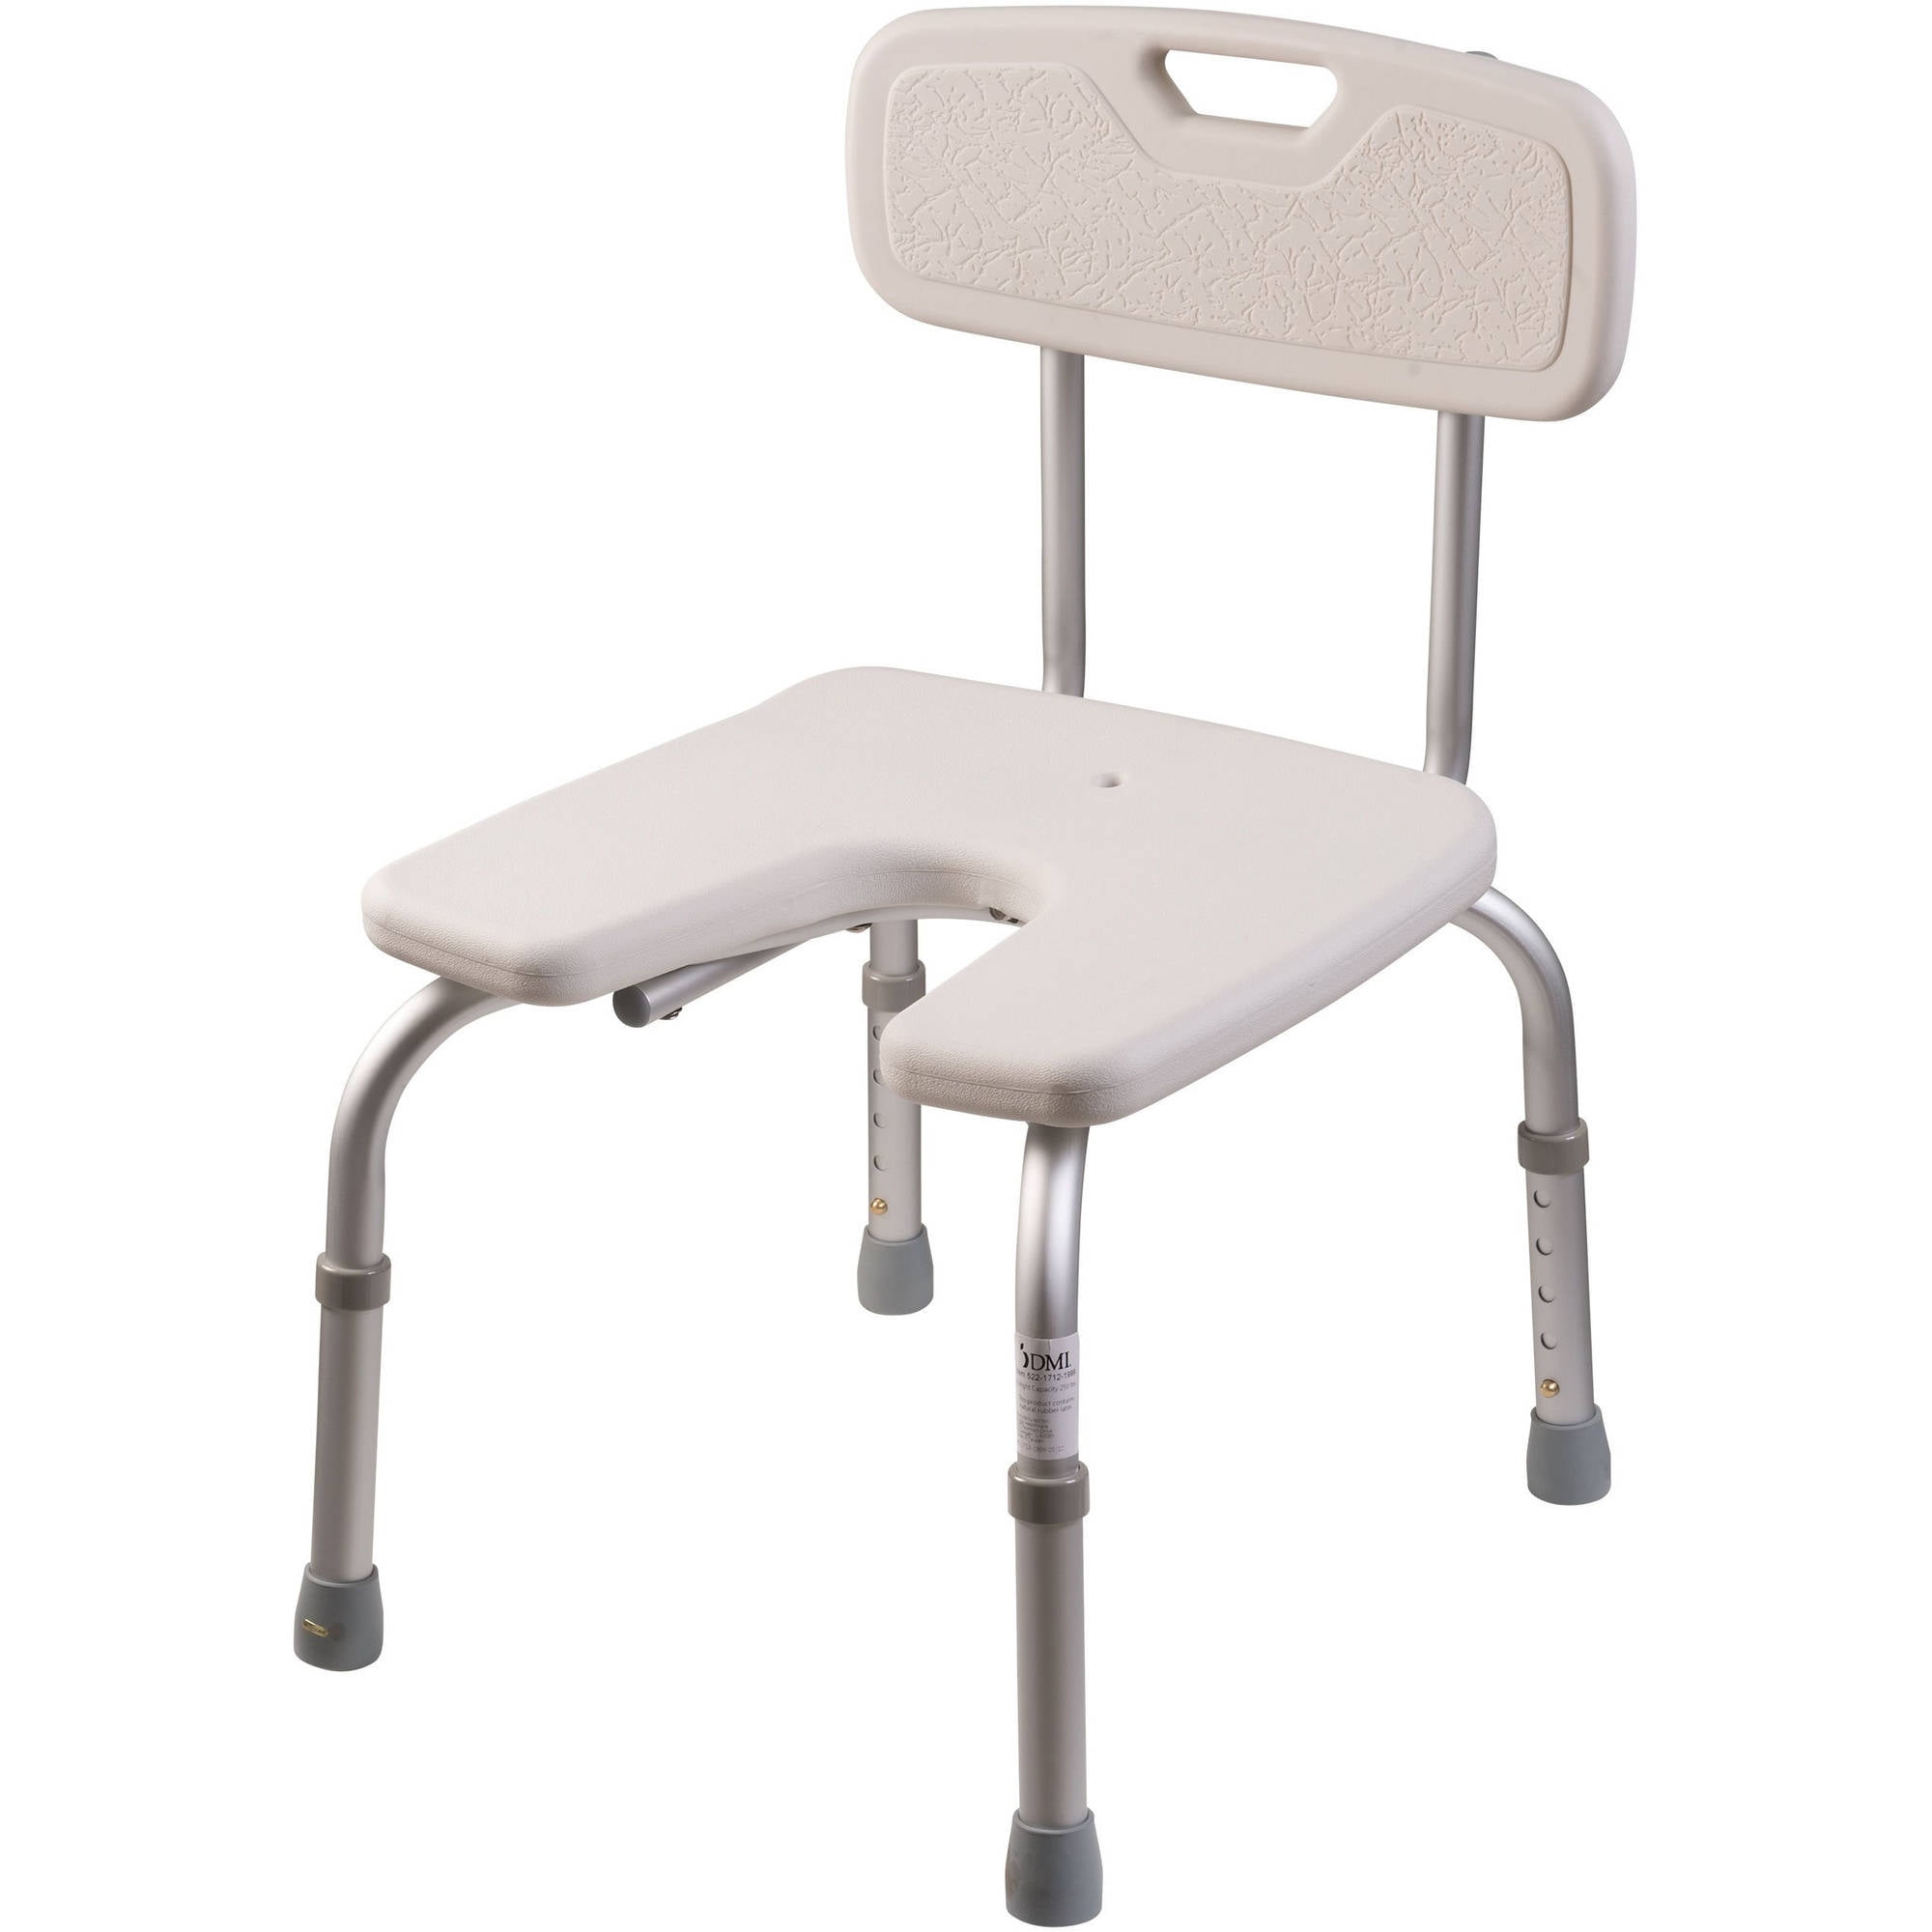 Dmi Shower Chair With Removable Back, Bathtub Safety Seat Seniors